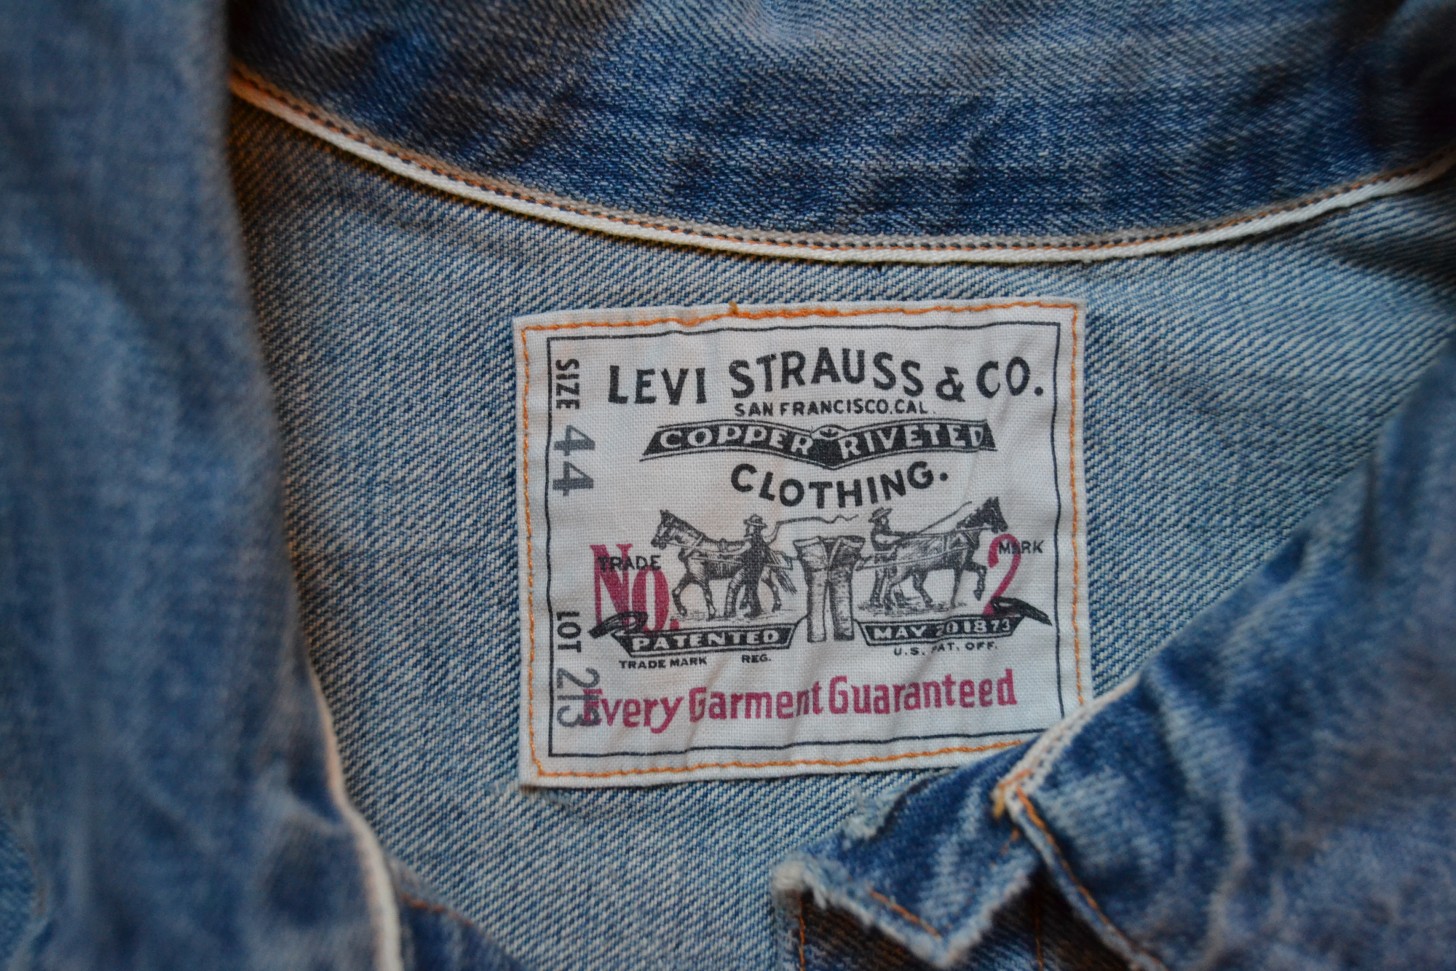 levi's labels through the years